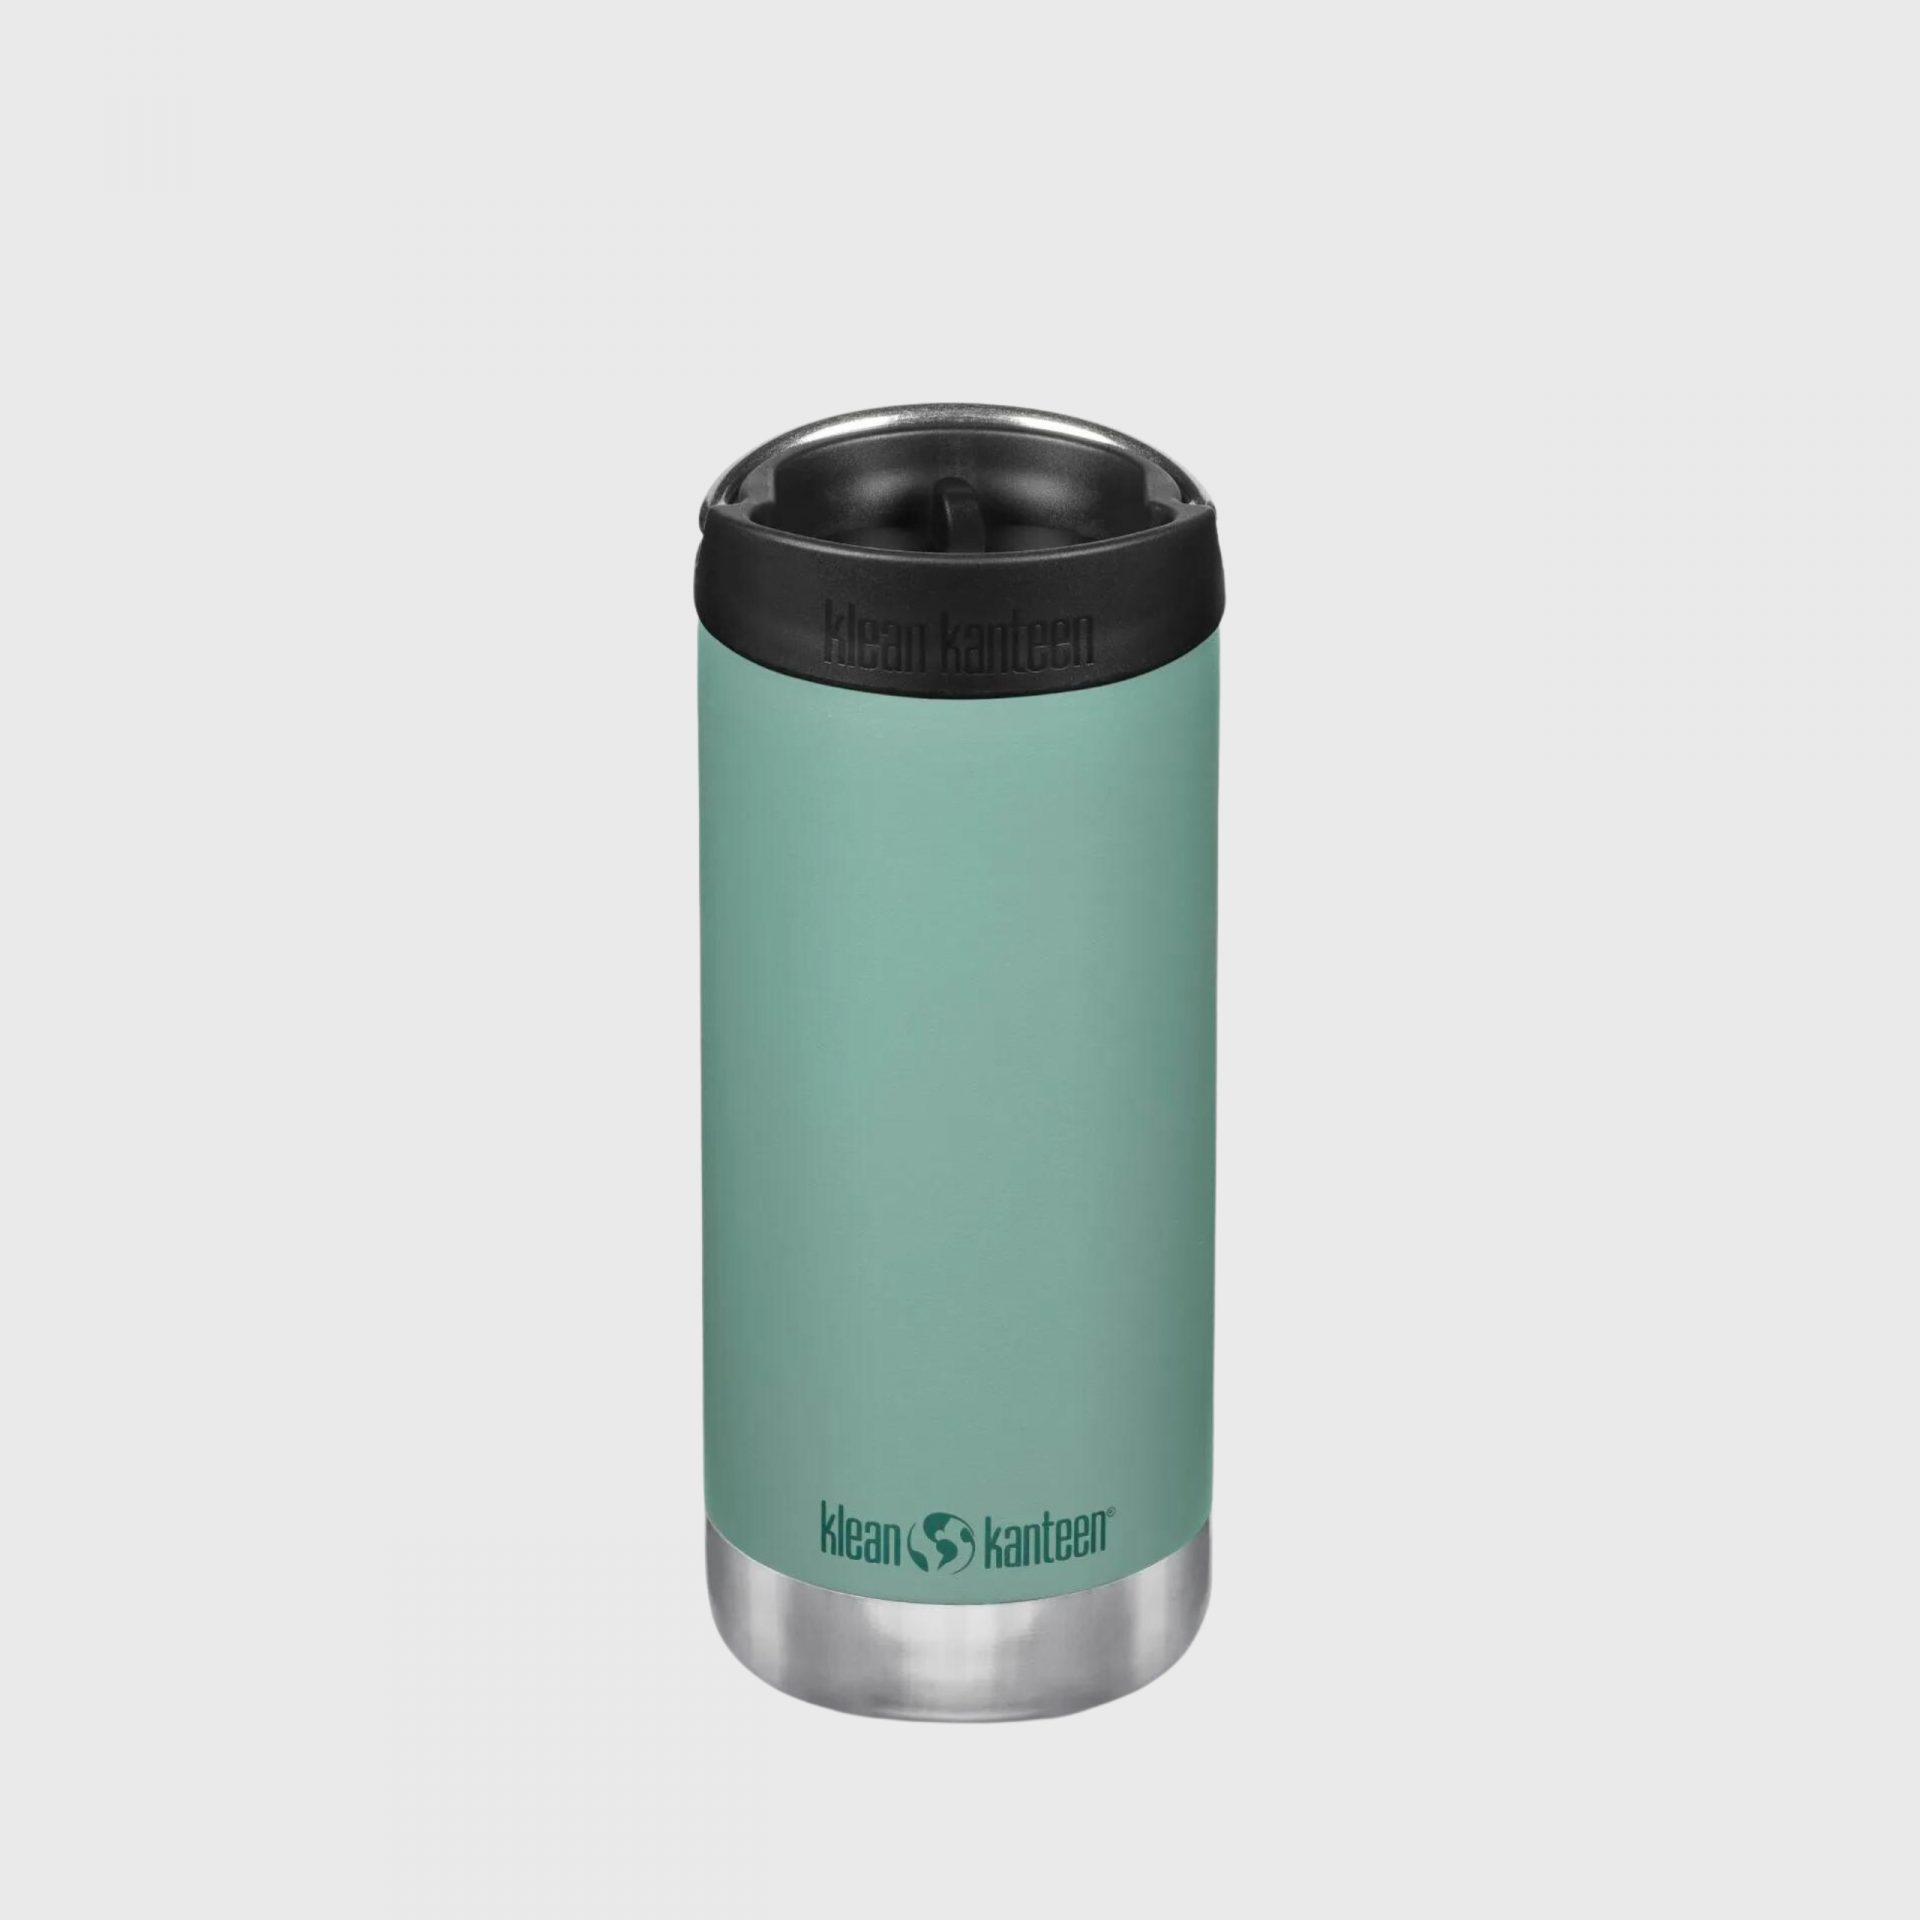 Klean Kanteen Singapore Sustainable Corporate Gifts 12 oz TKWide Insulated Coffee Tumbler with Café Cap Beryl Green